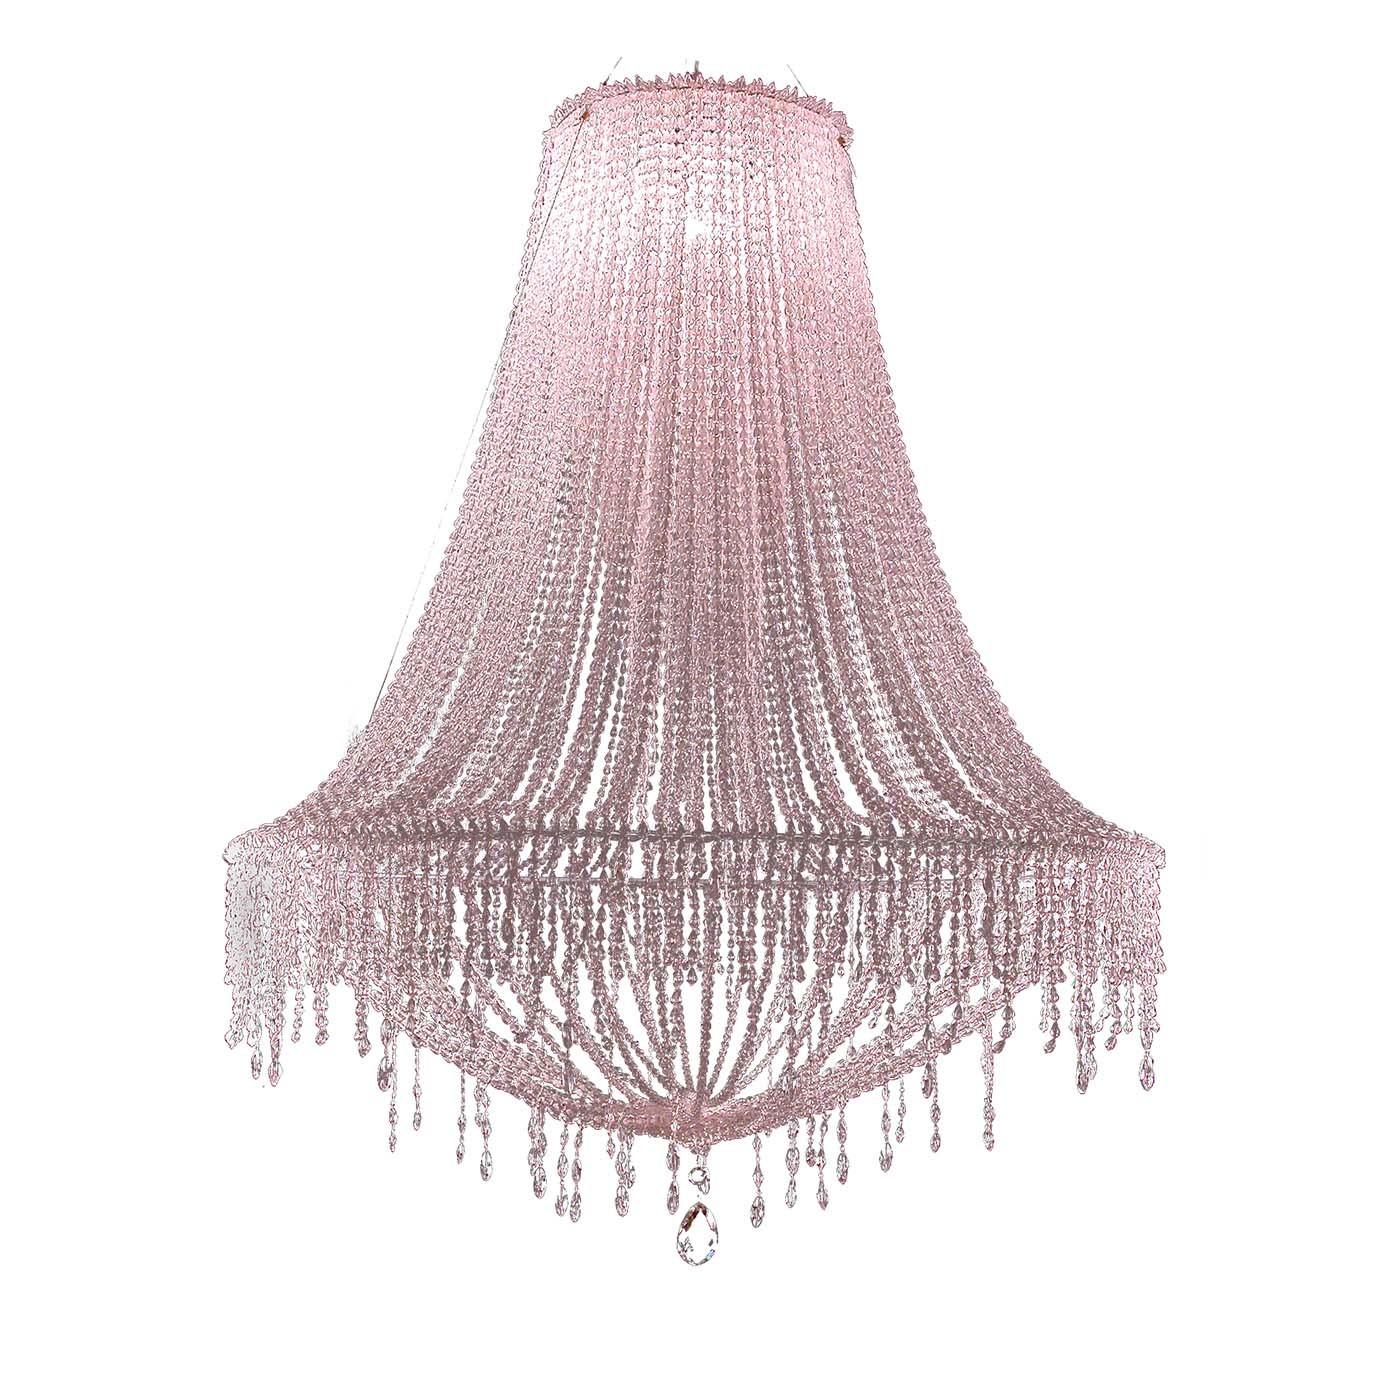 Boasting an opulent, flared silhouette composed of charming strands of acrylic beads and prized crystals, this splendid pendant lamp is meticulously handcrafted. The lamp's warm light reflects on all these elements producing a stunning visual